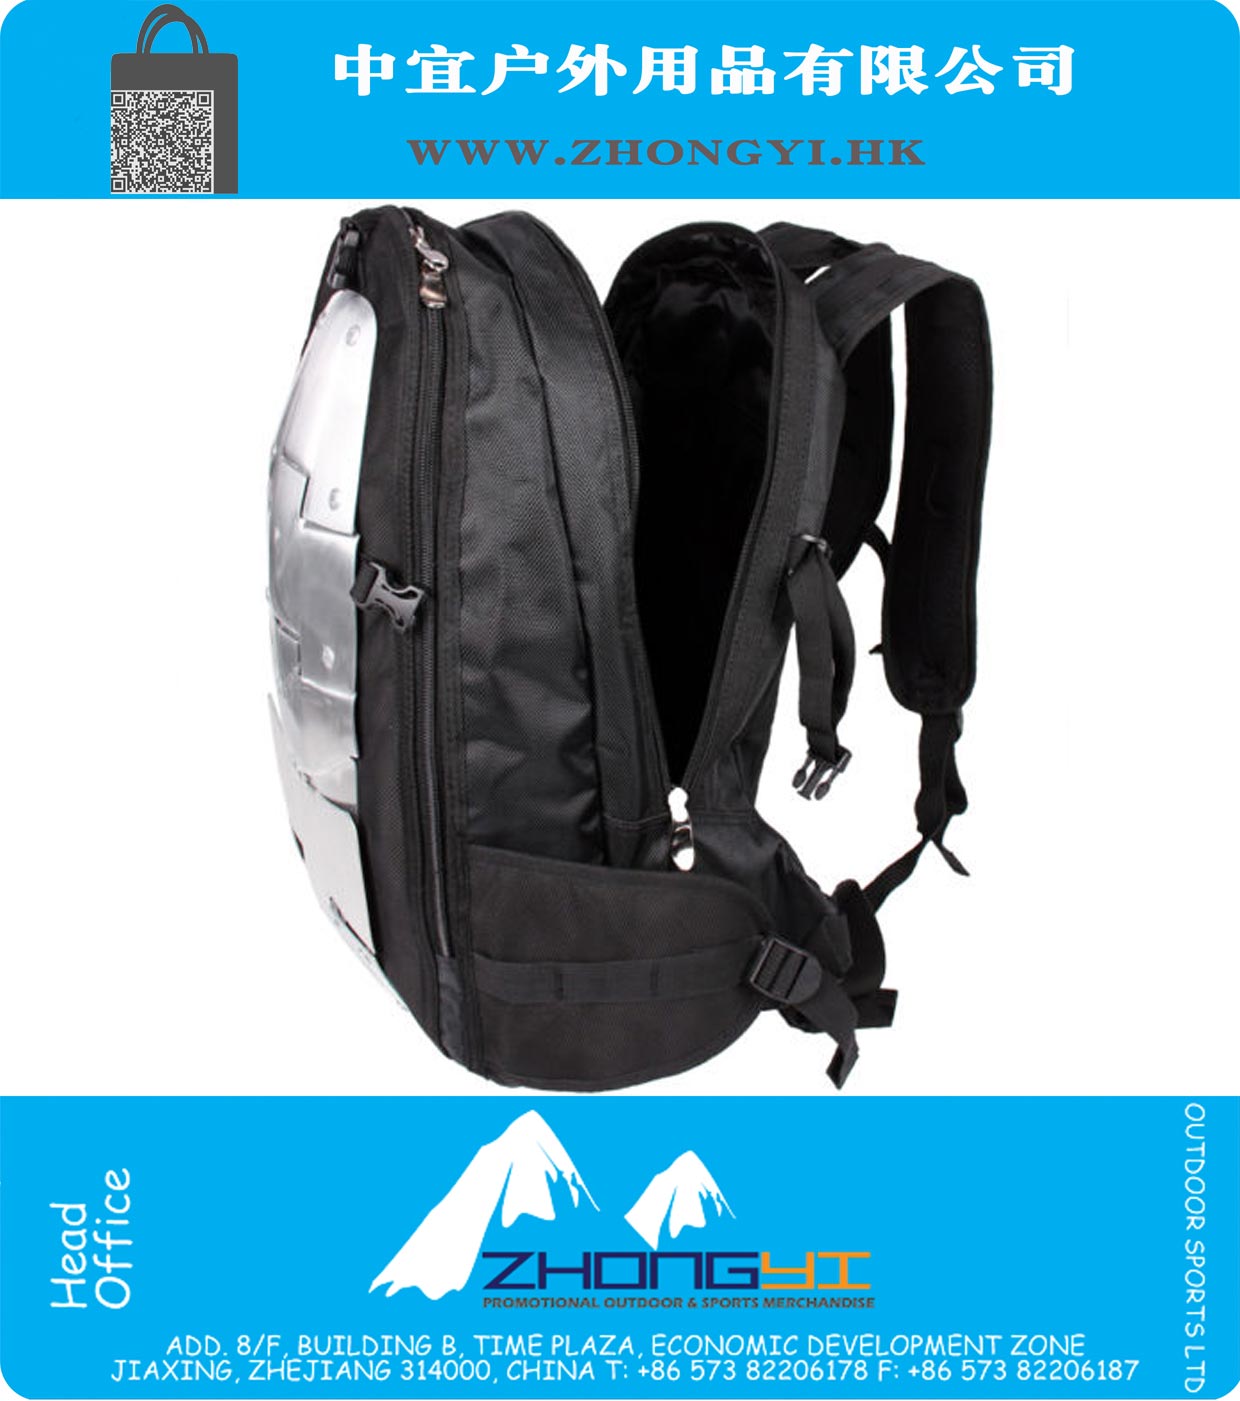 5 Pieces High Quality Aluminum Plate Spine Protection. 2 Strong Zipper Compartments with 1 Interior Pocket to Maximum Stuffs You Can Take. Large Space to Hold Laptop and Gear. Fit & Shape Back Padded, Ergonomic Shoulder Straps for Extra Comfort. 5 St